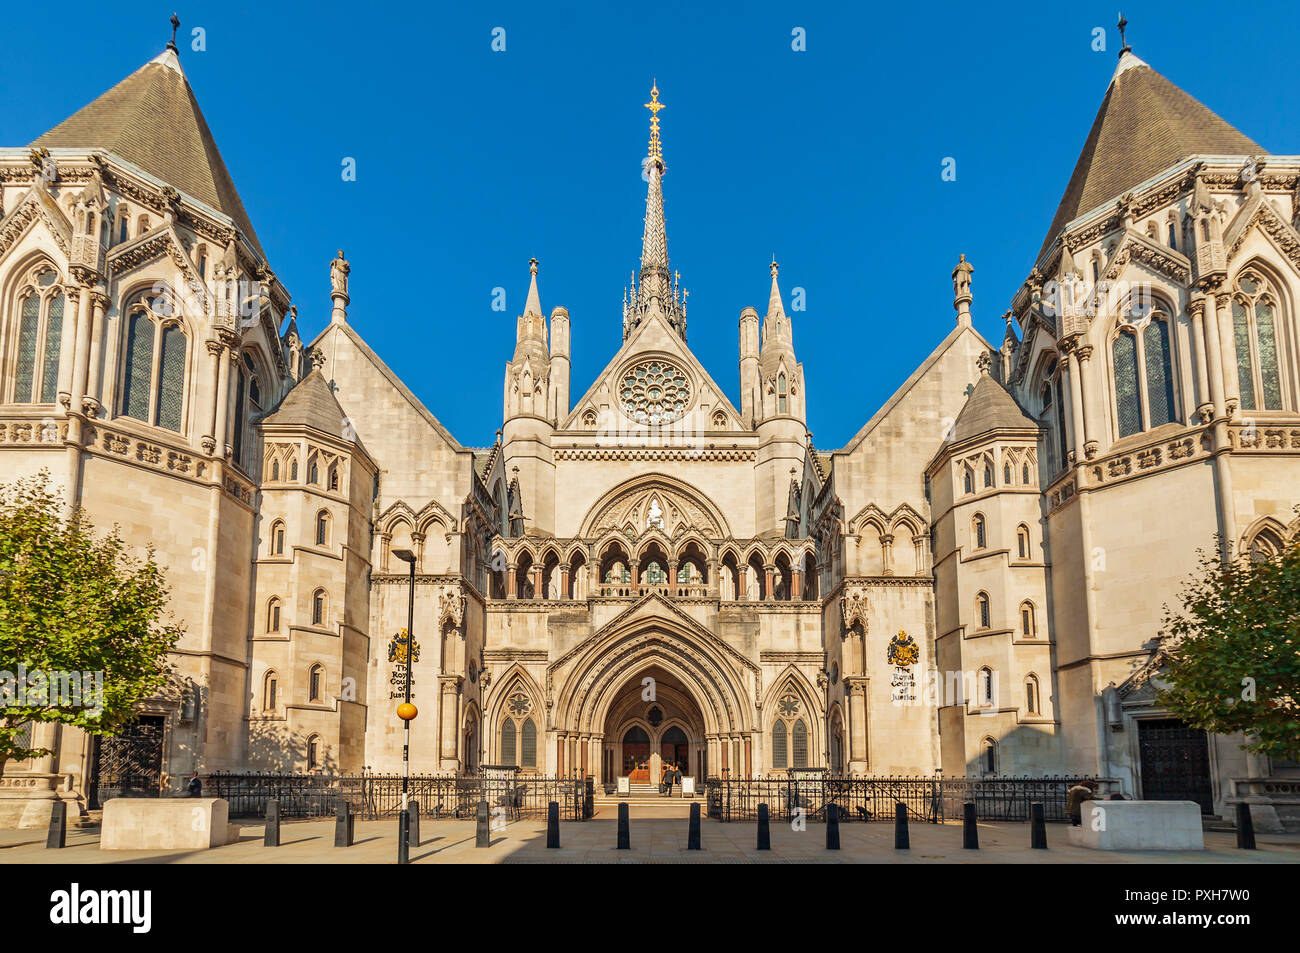 Il Royal Courts of Justice, Strand, Londra. Foto Stock